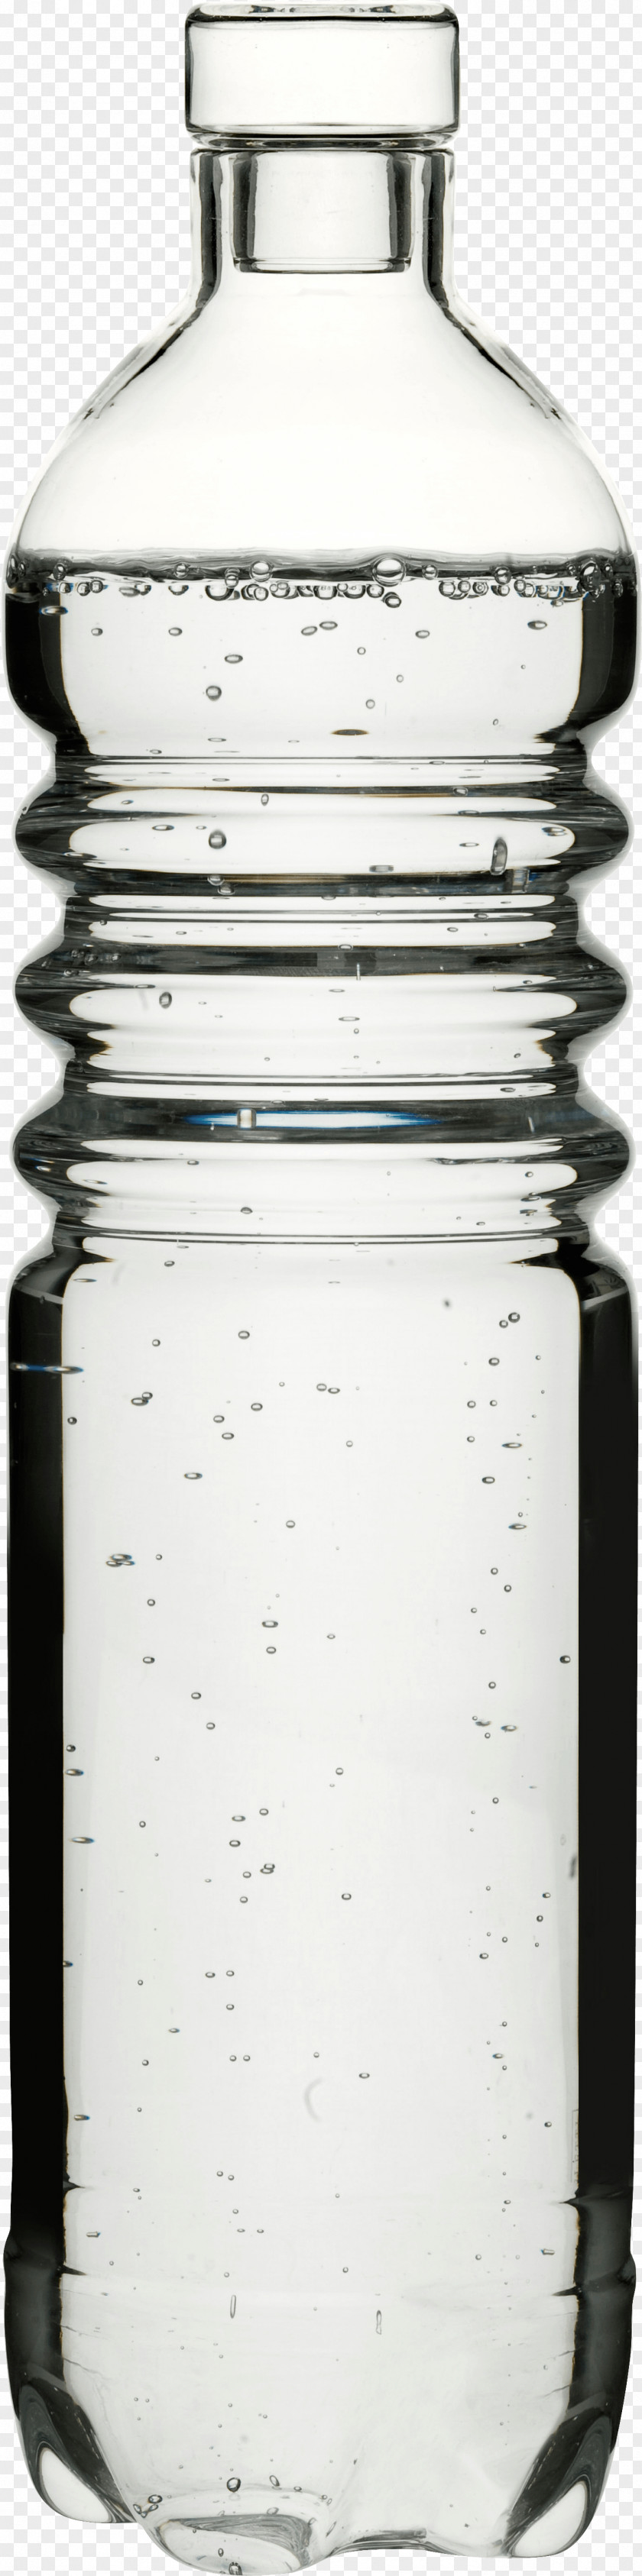 Water Plastic Bottle Image Bung Glass PNG